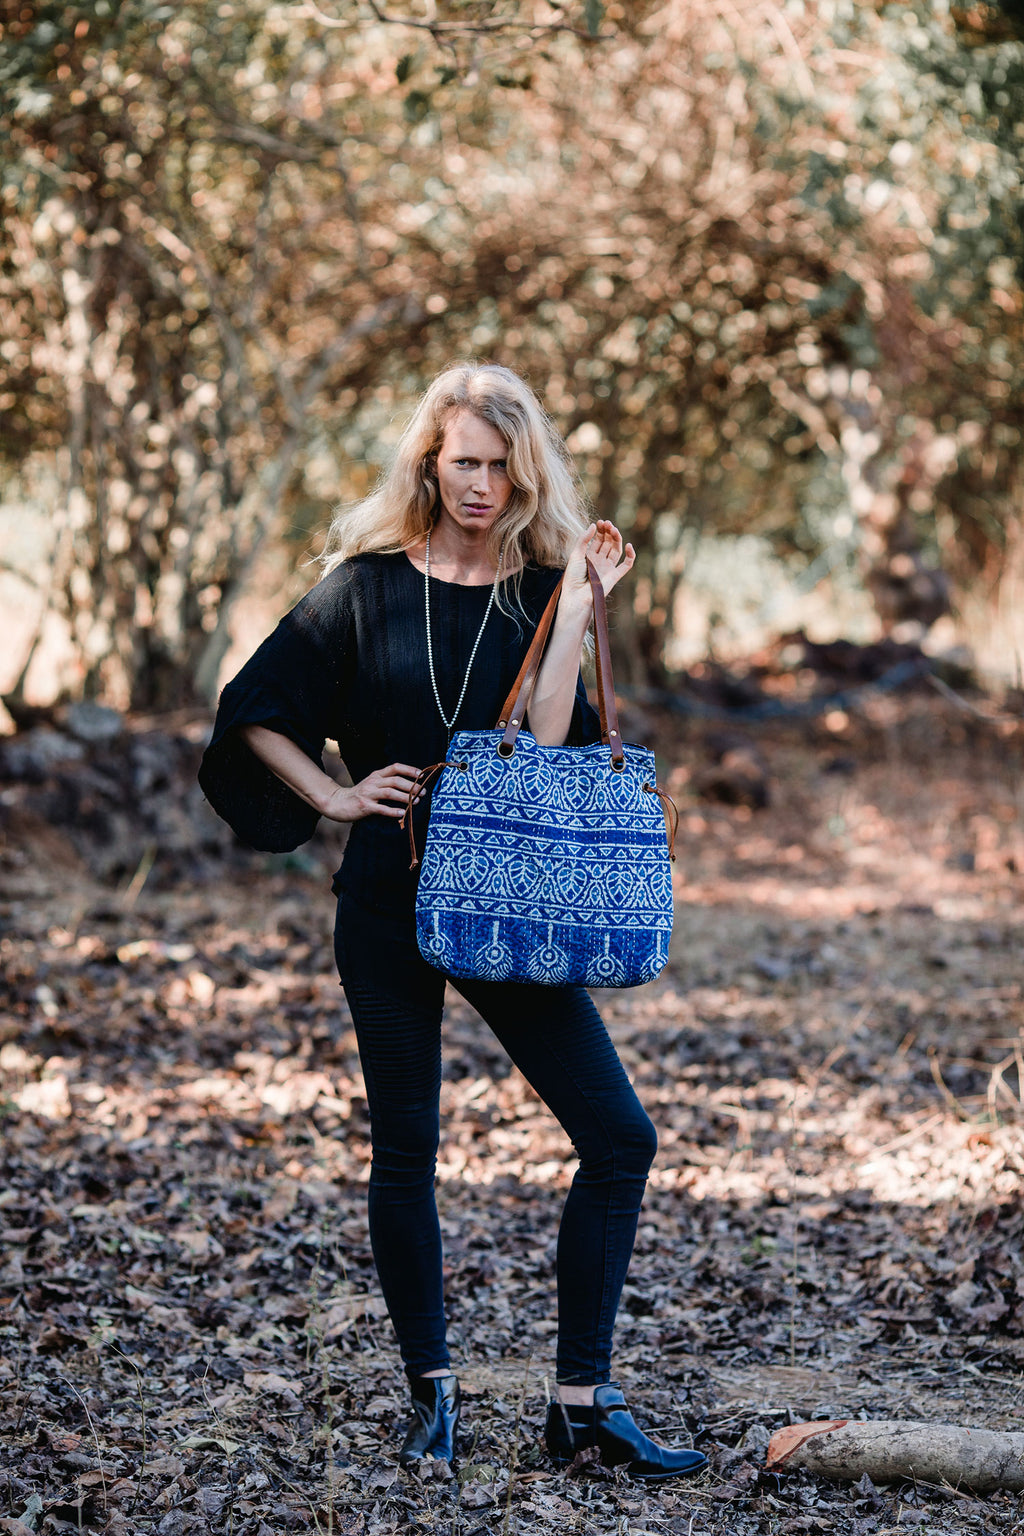 Leather Vintage Fabric Tote Bag in Indigo